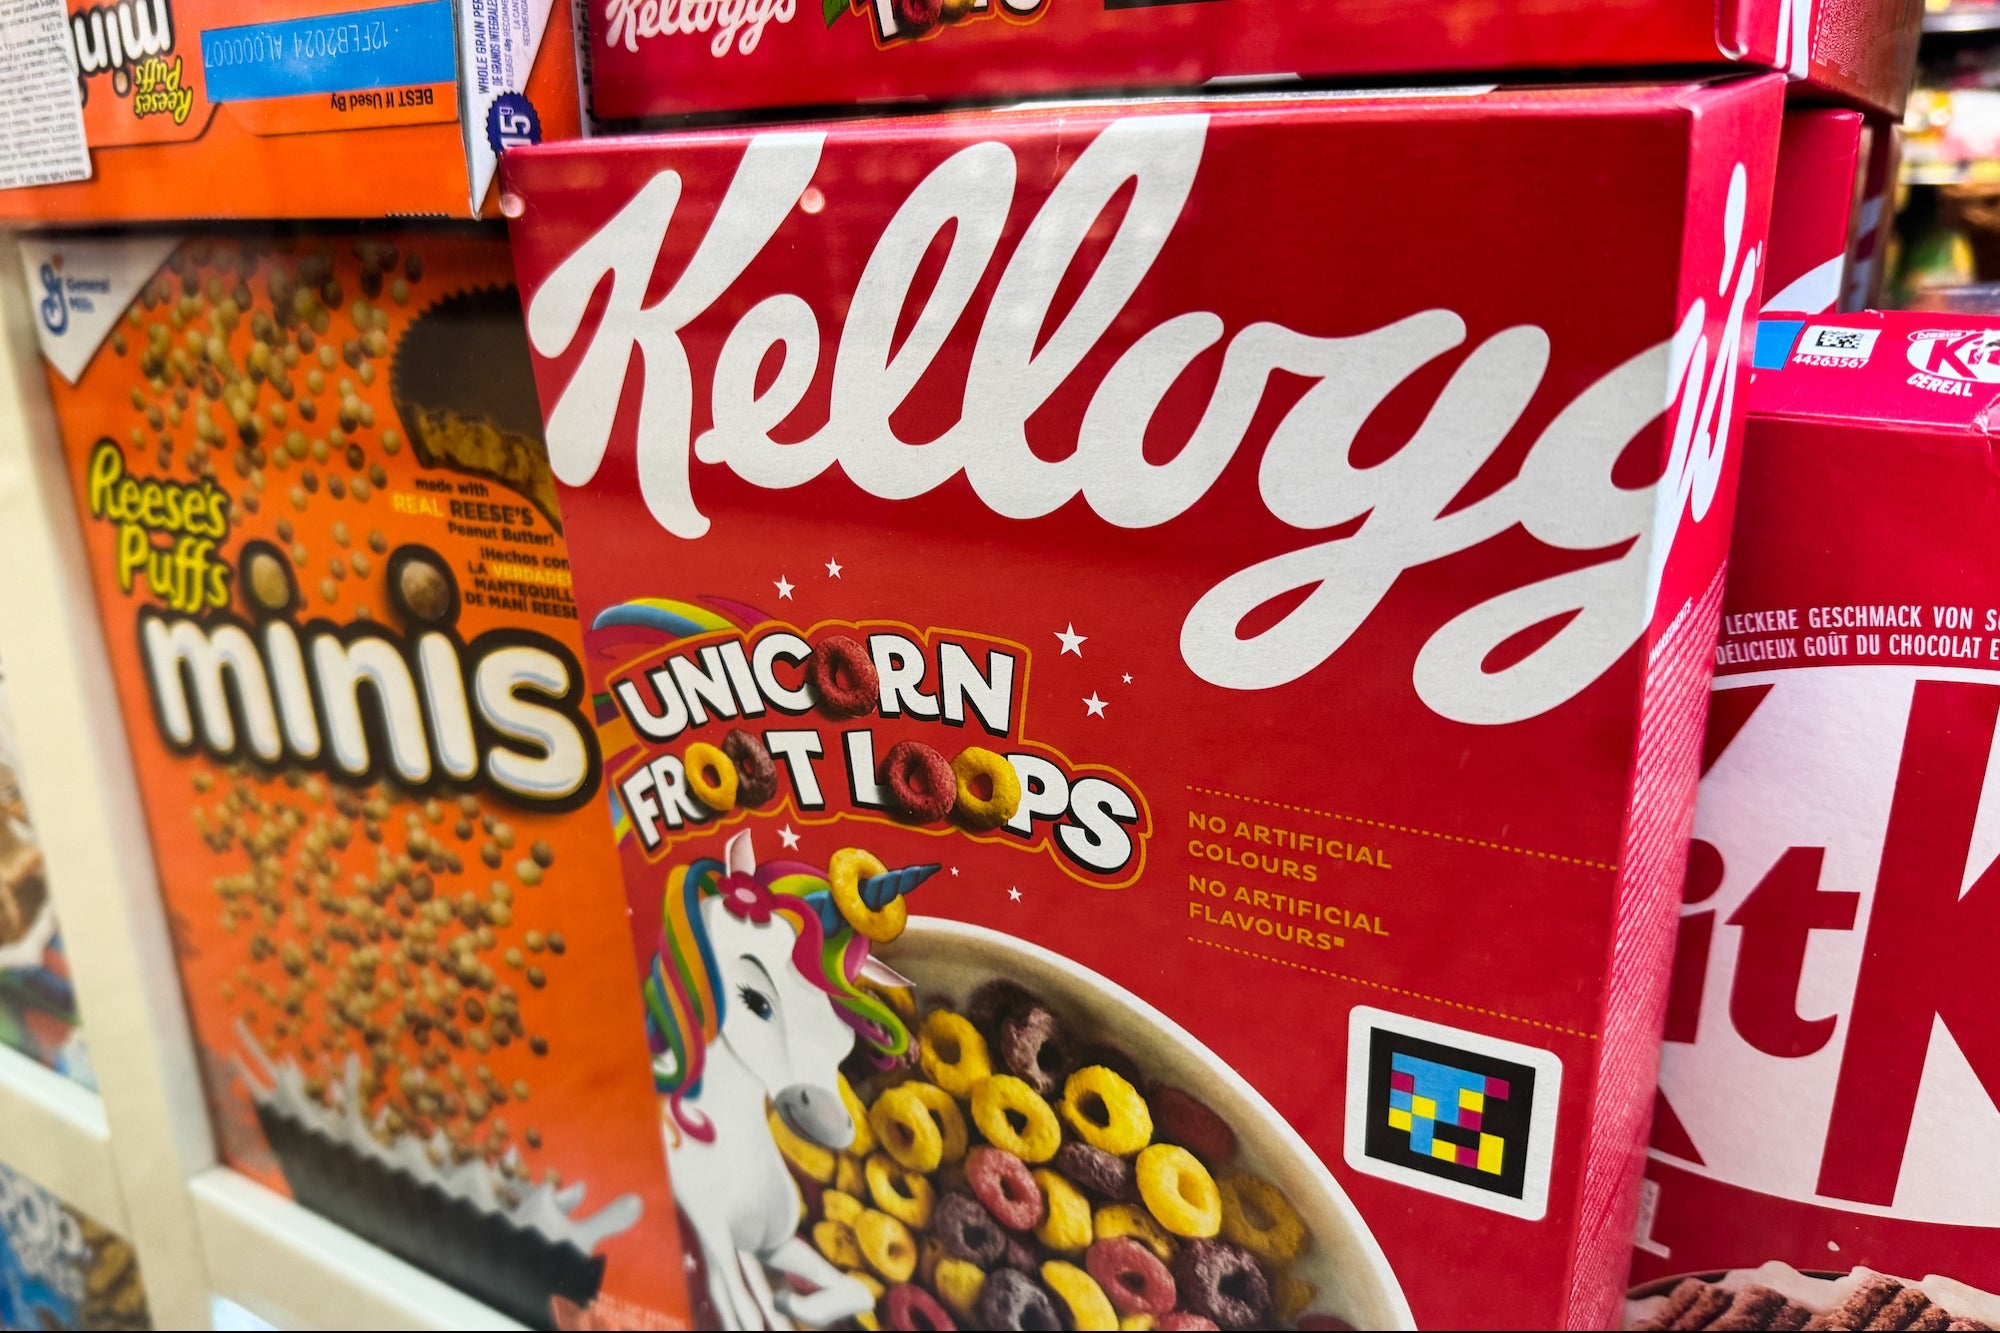 Kellogg’s CEO Suggests Eating Cereal as Dinner to Save Money [Video]